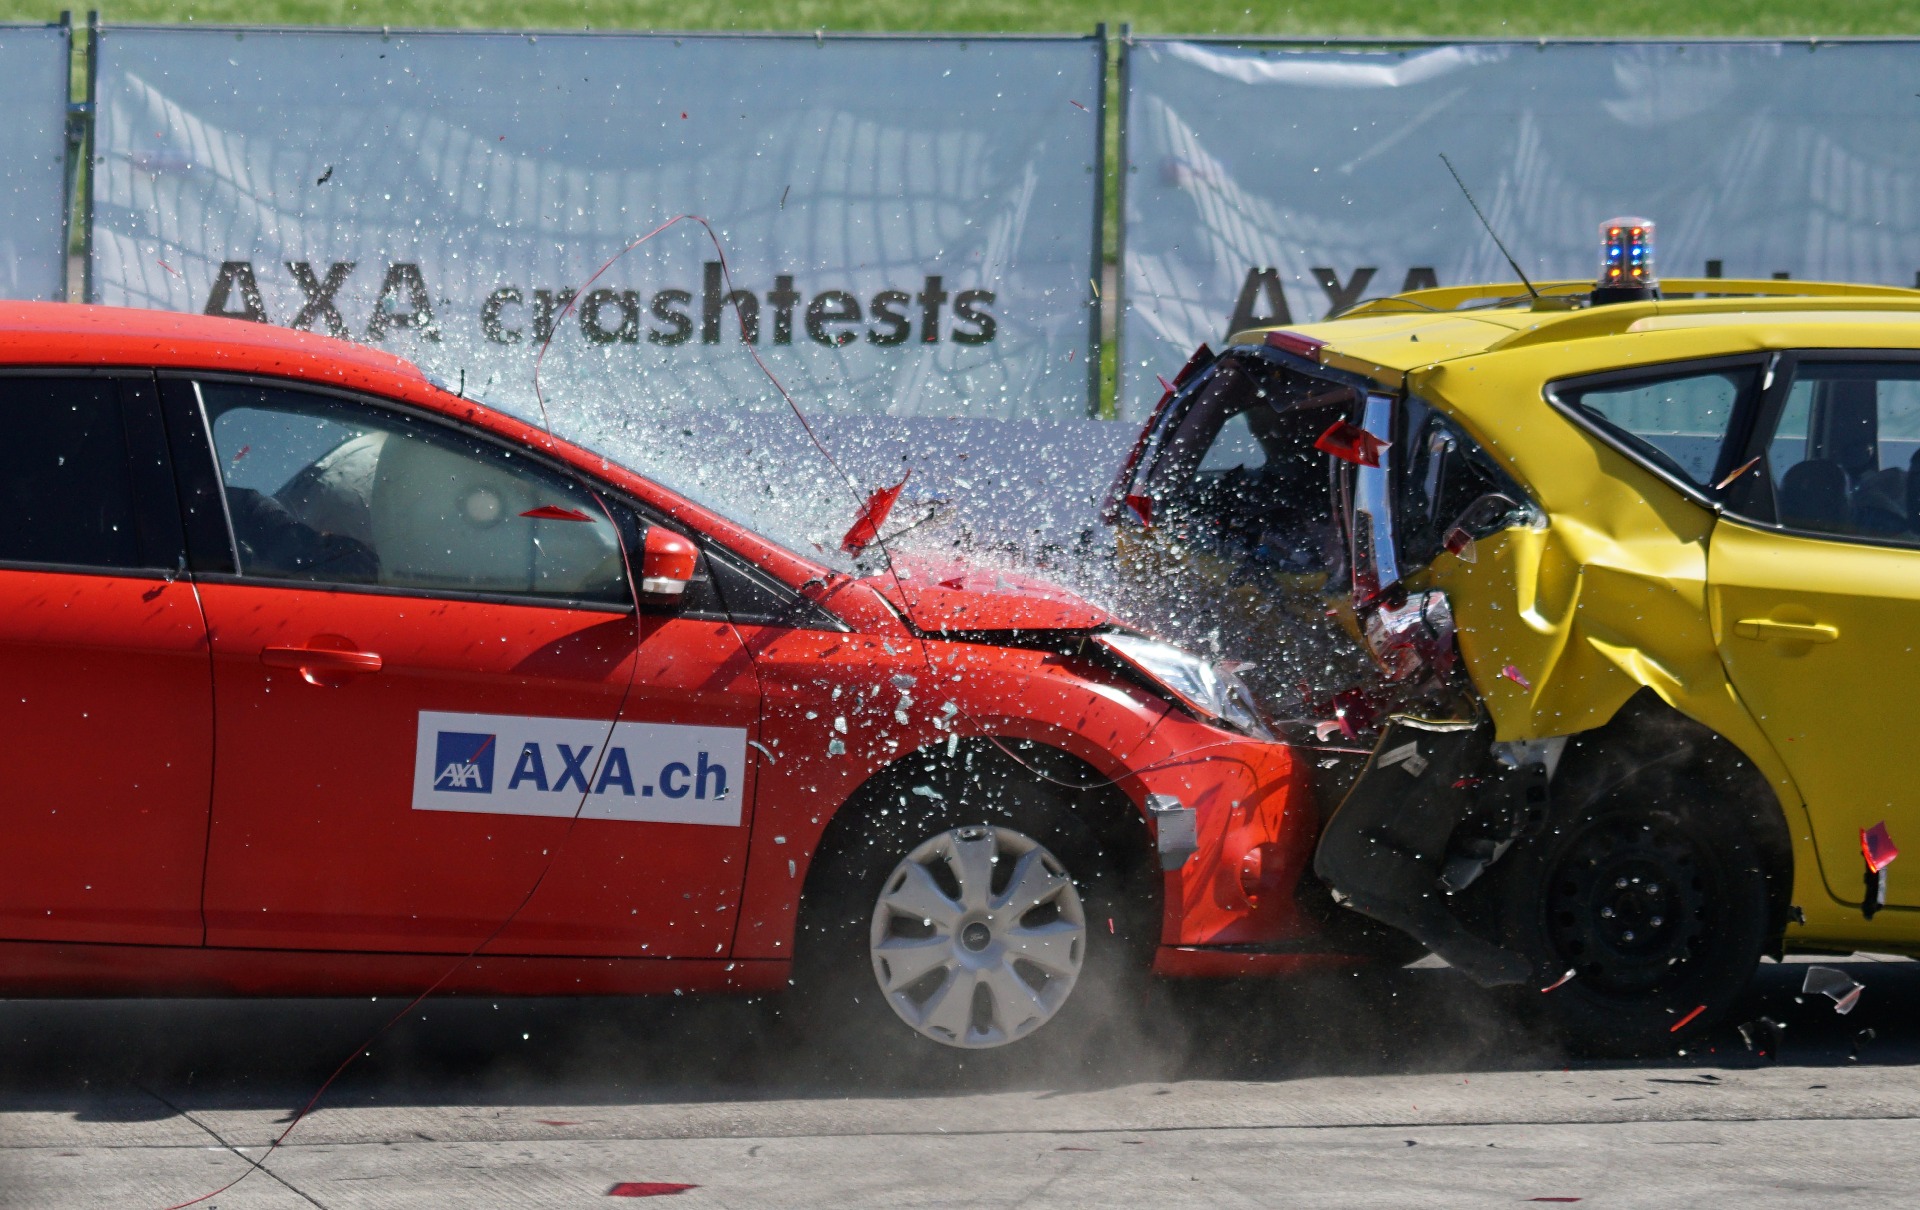 A red car crashing into the back of a yellow car.